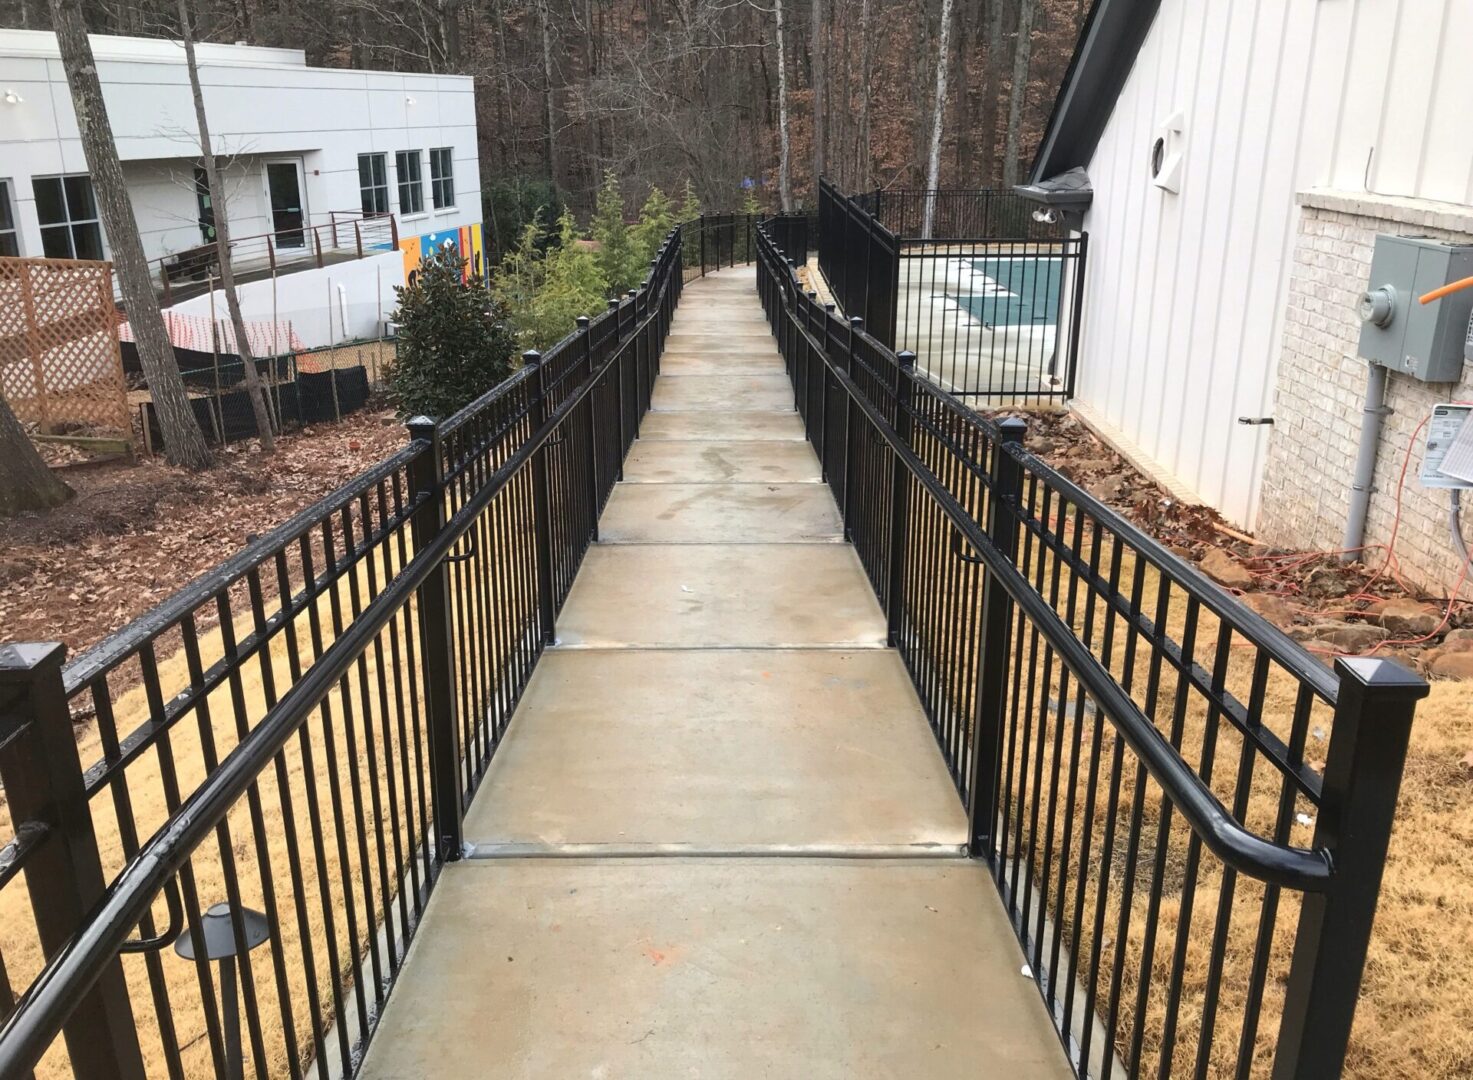 A walkway with metal railings leading to the side of a house.